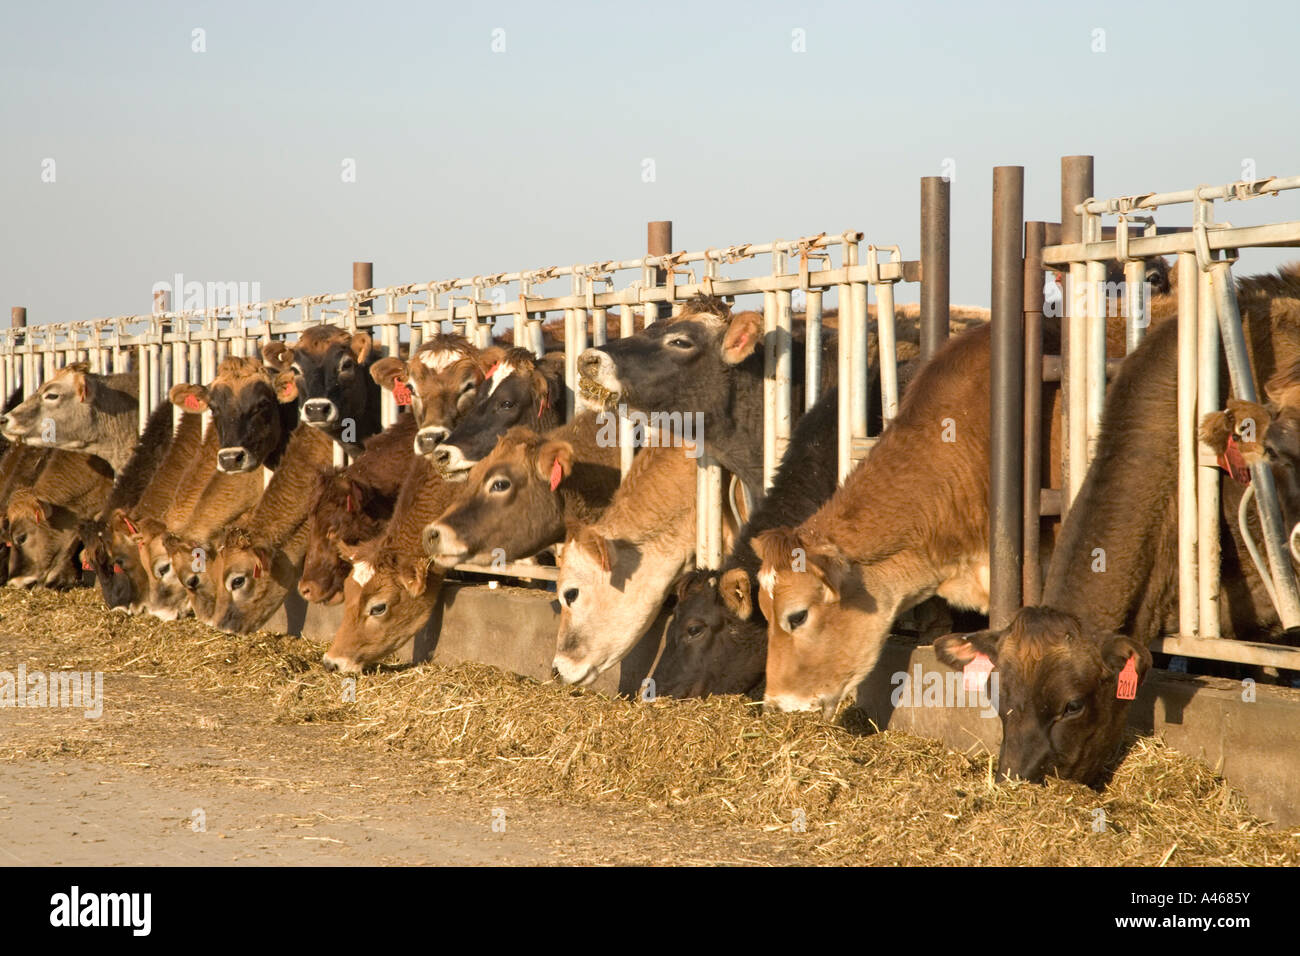 Jersey dairy cows feeding in stanchions. Stock Photo